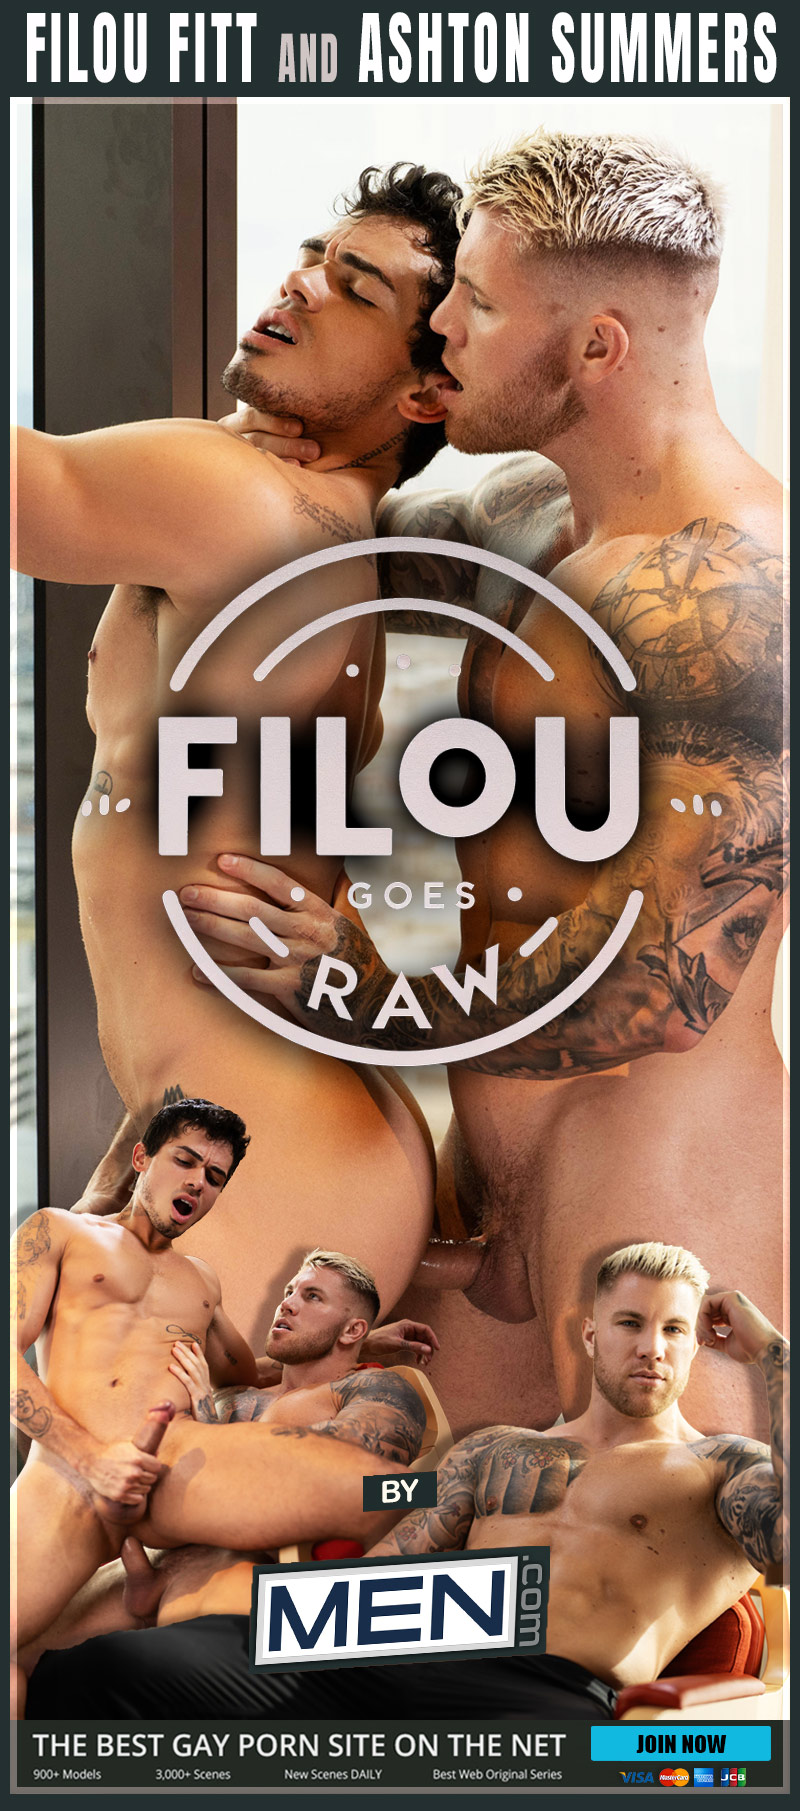 Filou Fitt Goes Raw with Ashton Summers at MEN.com